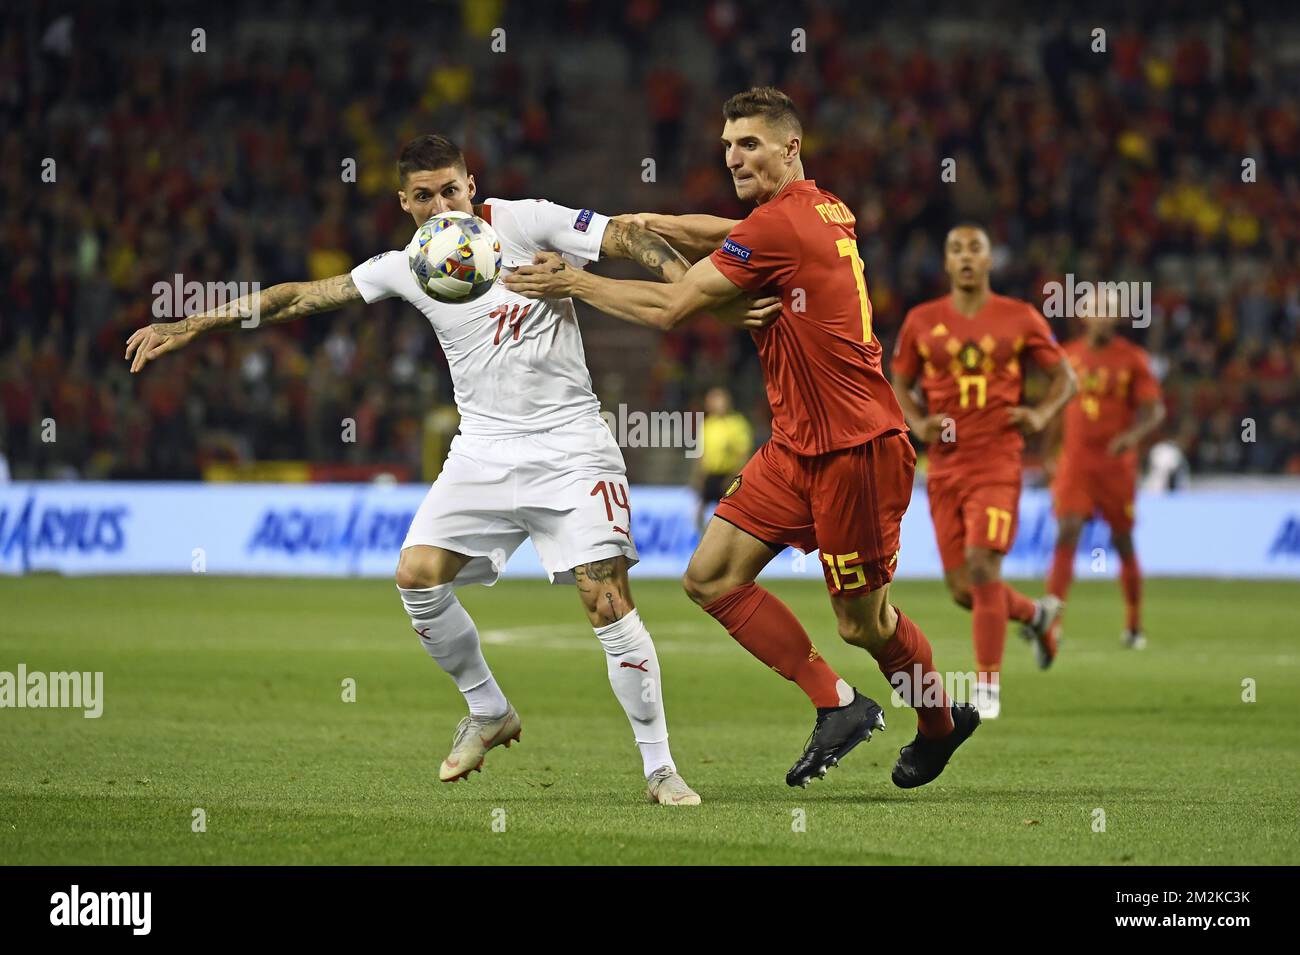 Swiss Steven Zuber and Belgium's Thomas Meunier fight for the ball during a soccer game between Belgian national team the Red Devils and Switzerland in Brussels, Friday 12 October 2018, the second game in group 2 of the UEFA Nations League A competition. BELGA PHOTO DIRK WAEM  Stock Photo